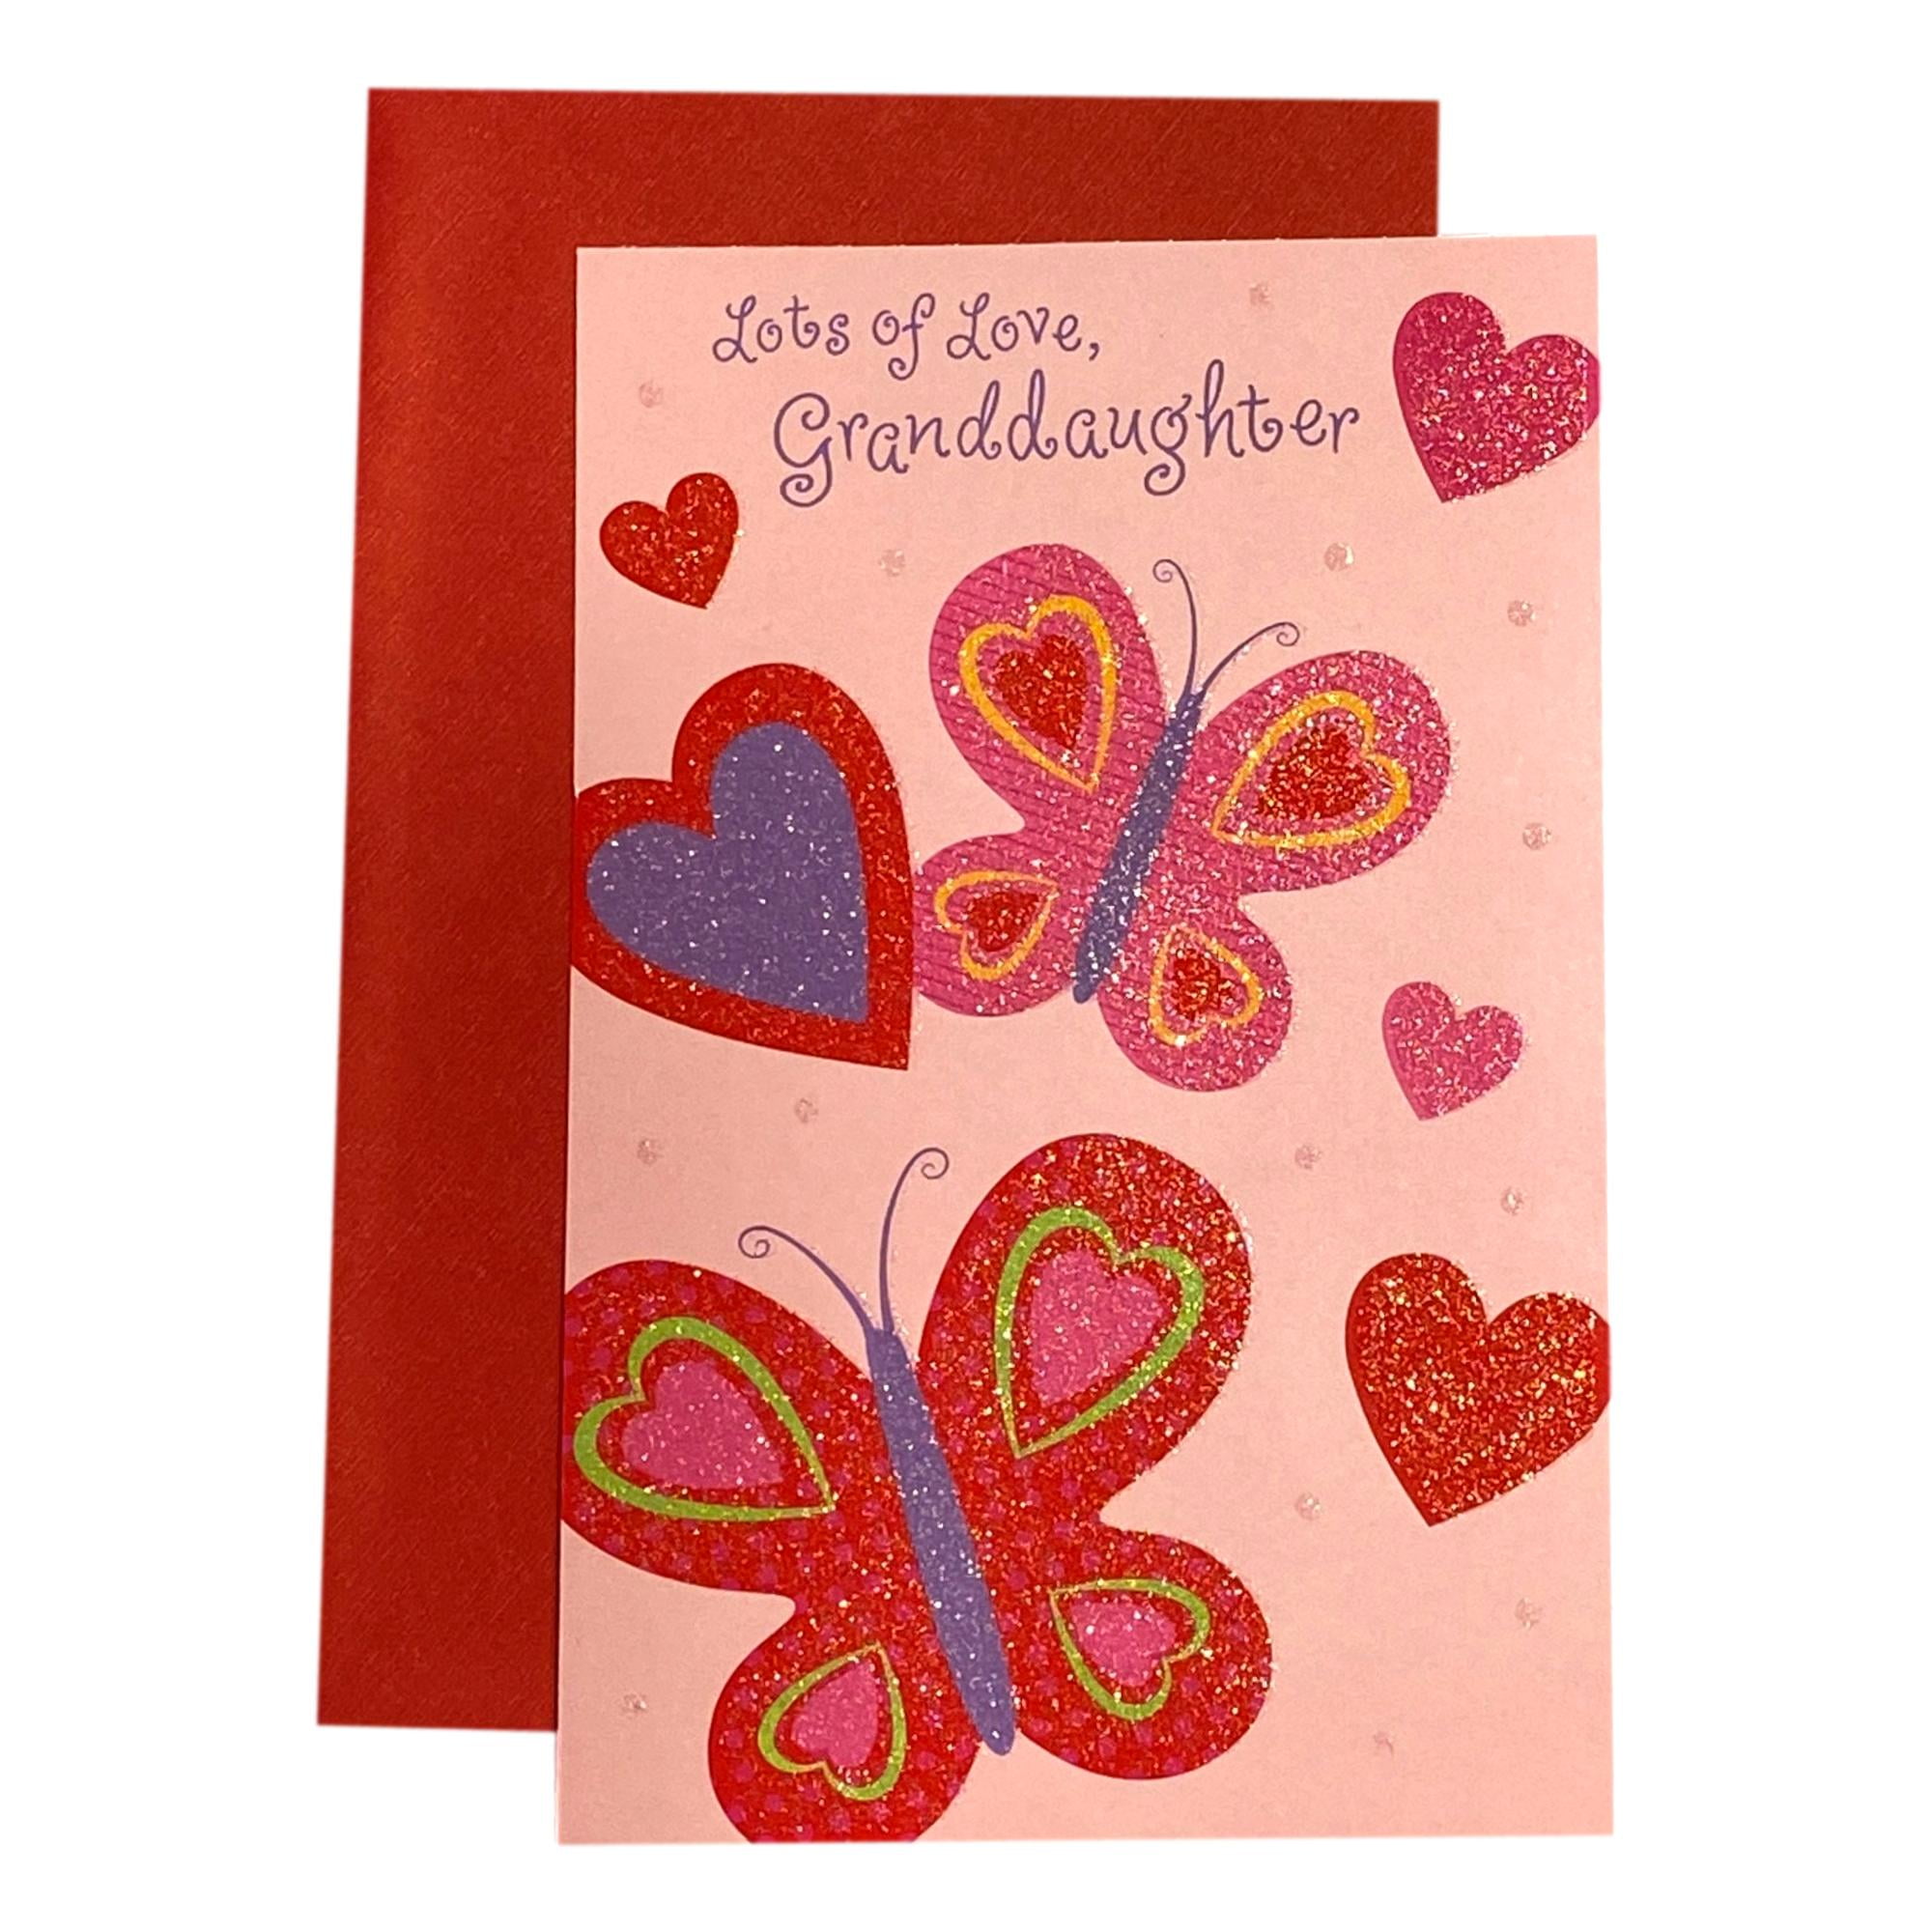 GORGEOUS GLITTER COATED SPECIAL GRANDDAUGHTER & HUSBAND WEDDING GREETING CARD 